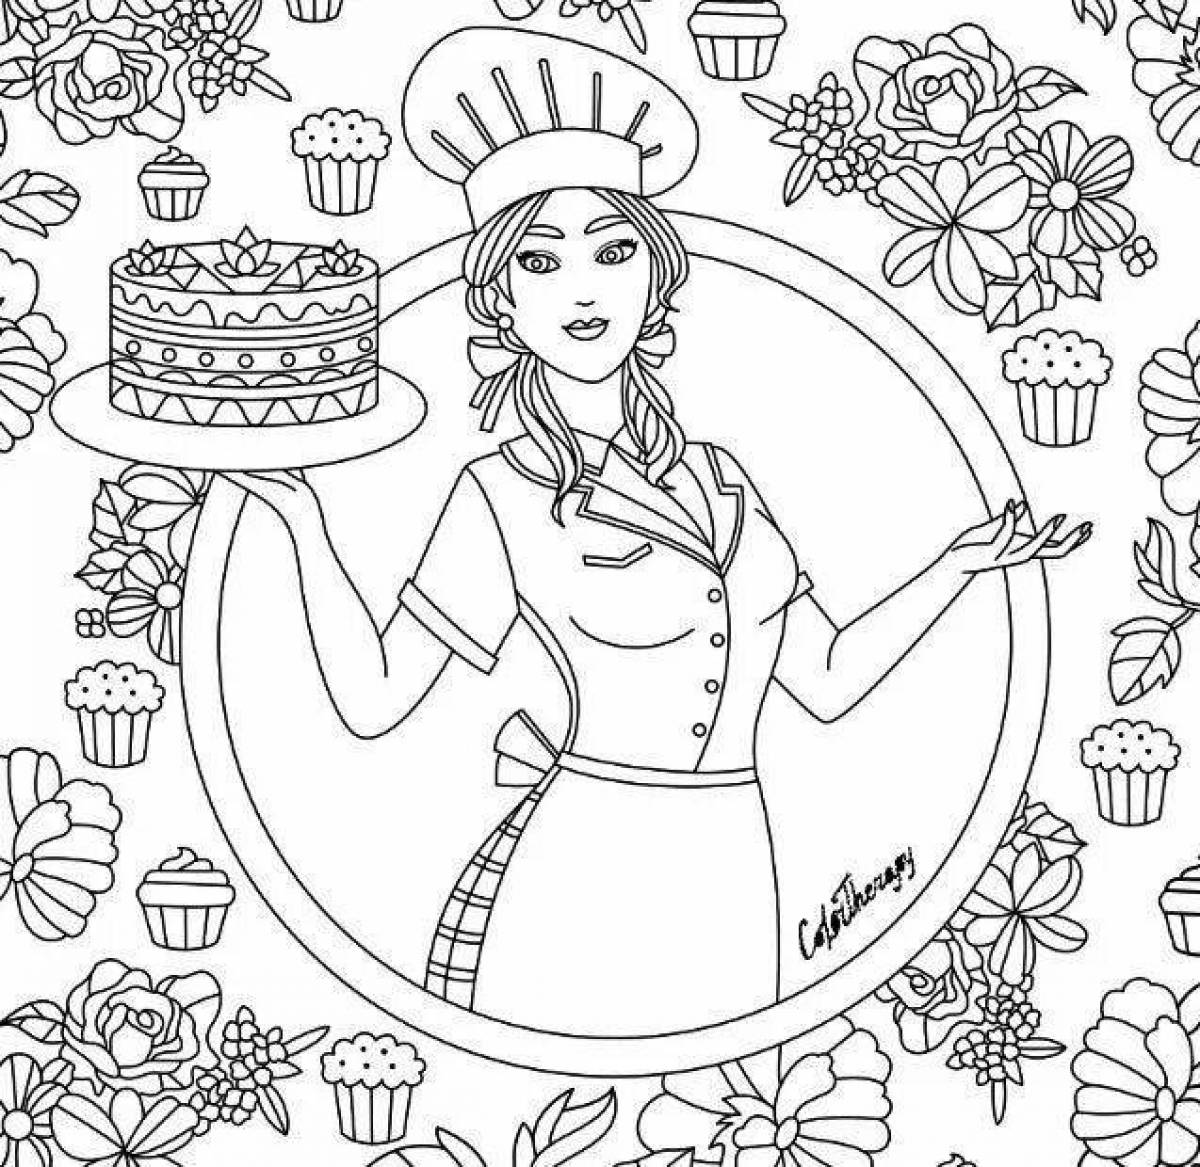 Fabulous confectioner coloring page